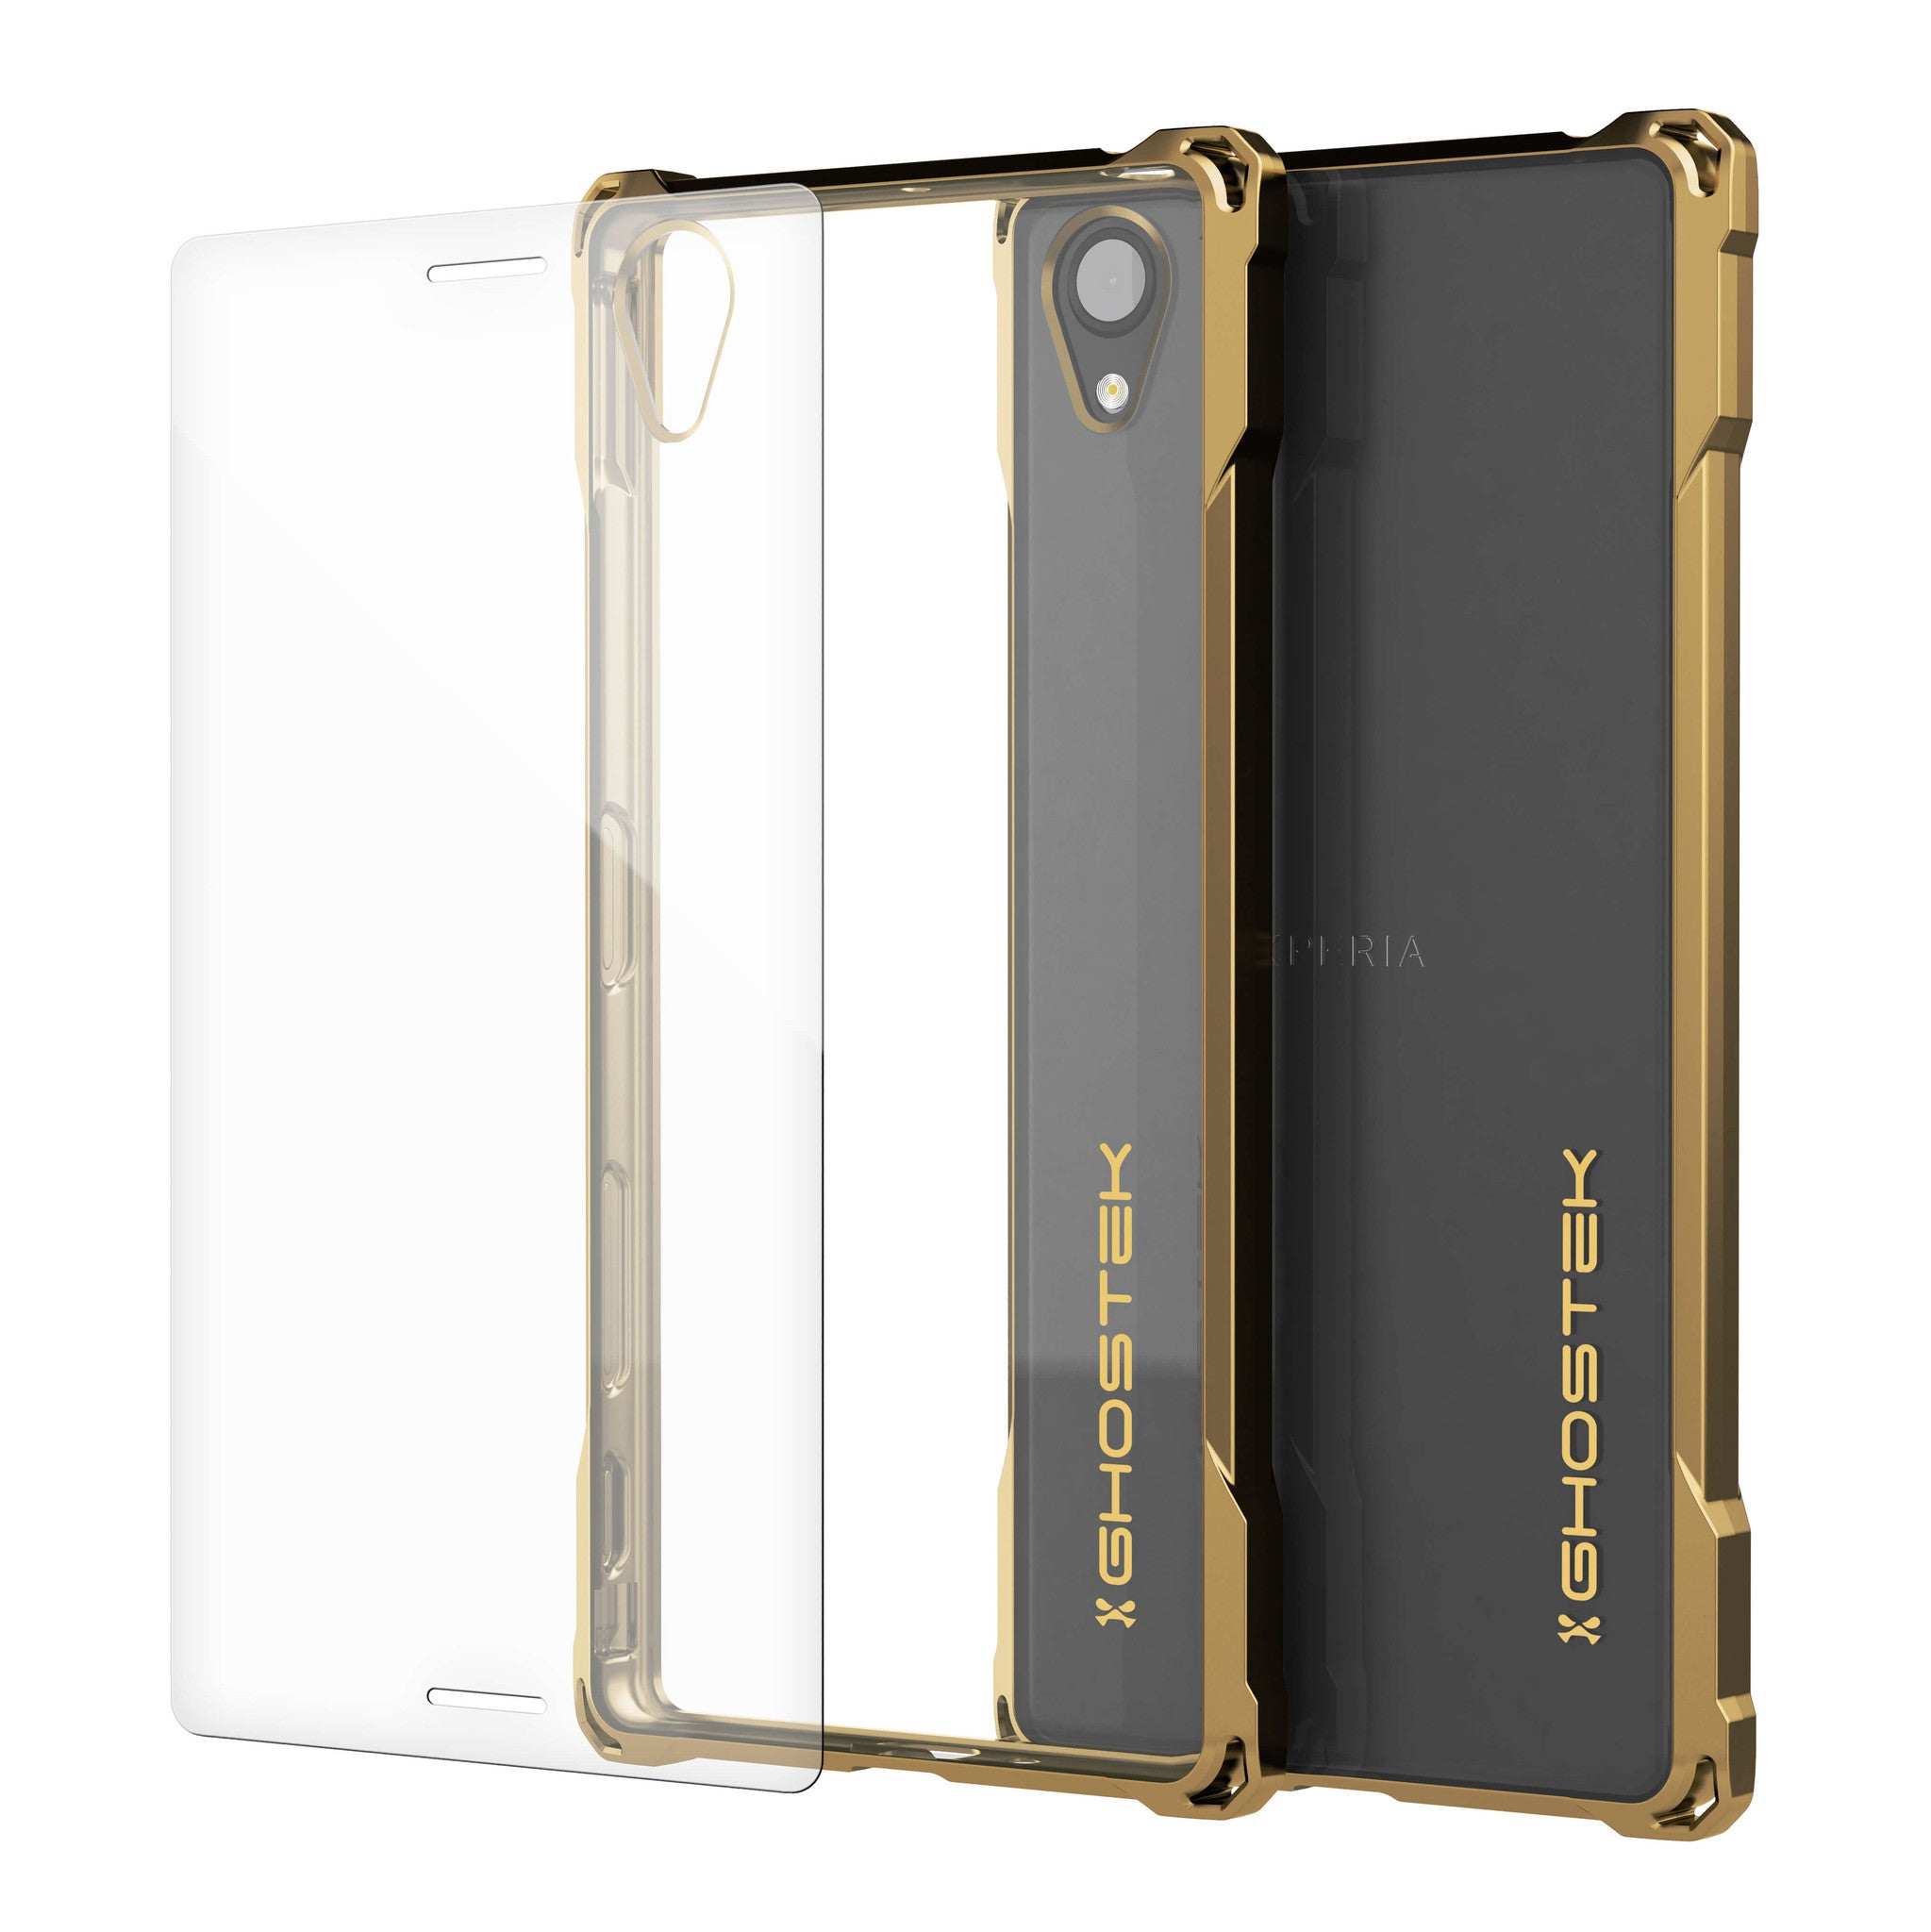 Xperia X Case, Ghostek® Covert Gold Series | Clear TPU | Warranty | Screen Protector | Ultra Fit (Color in image: Gold)